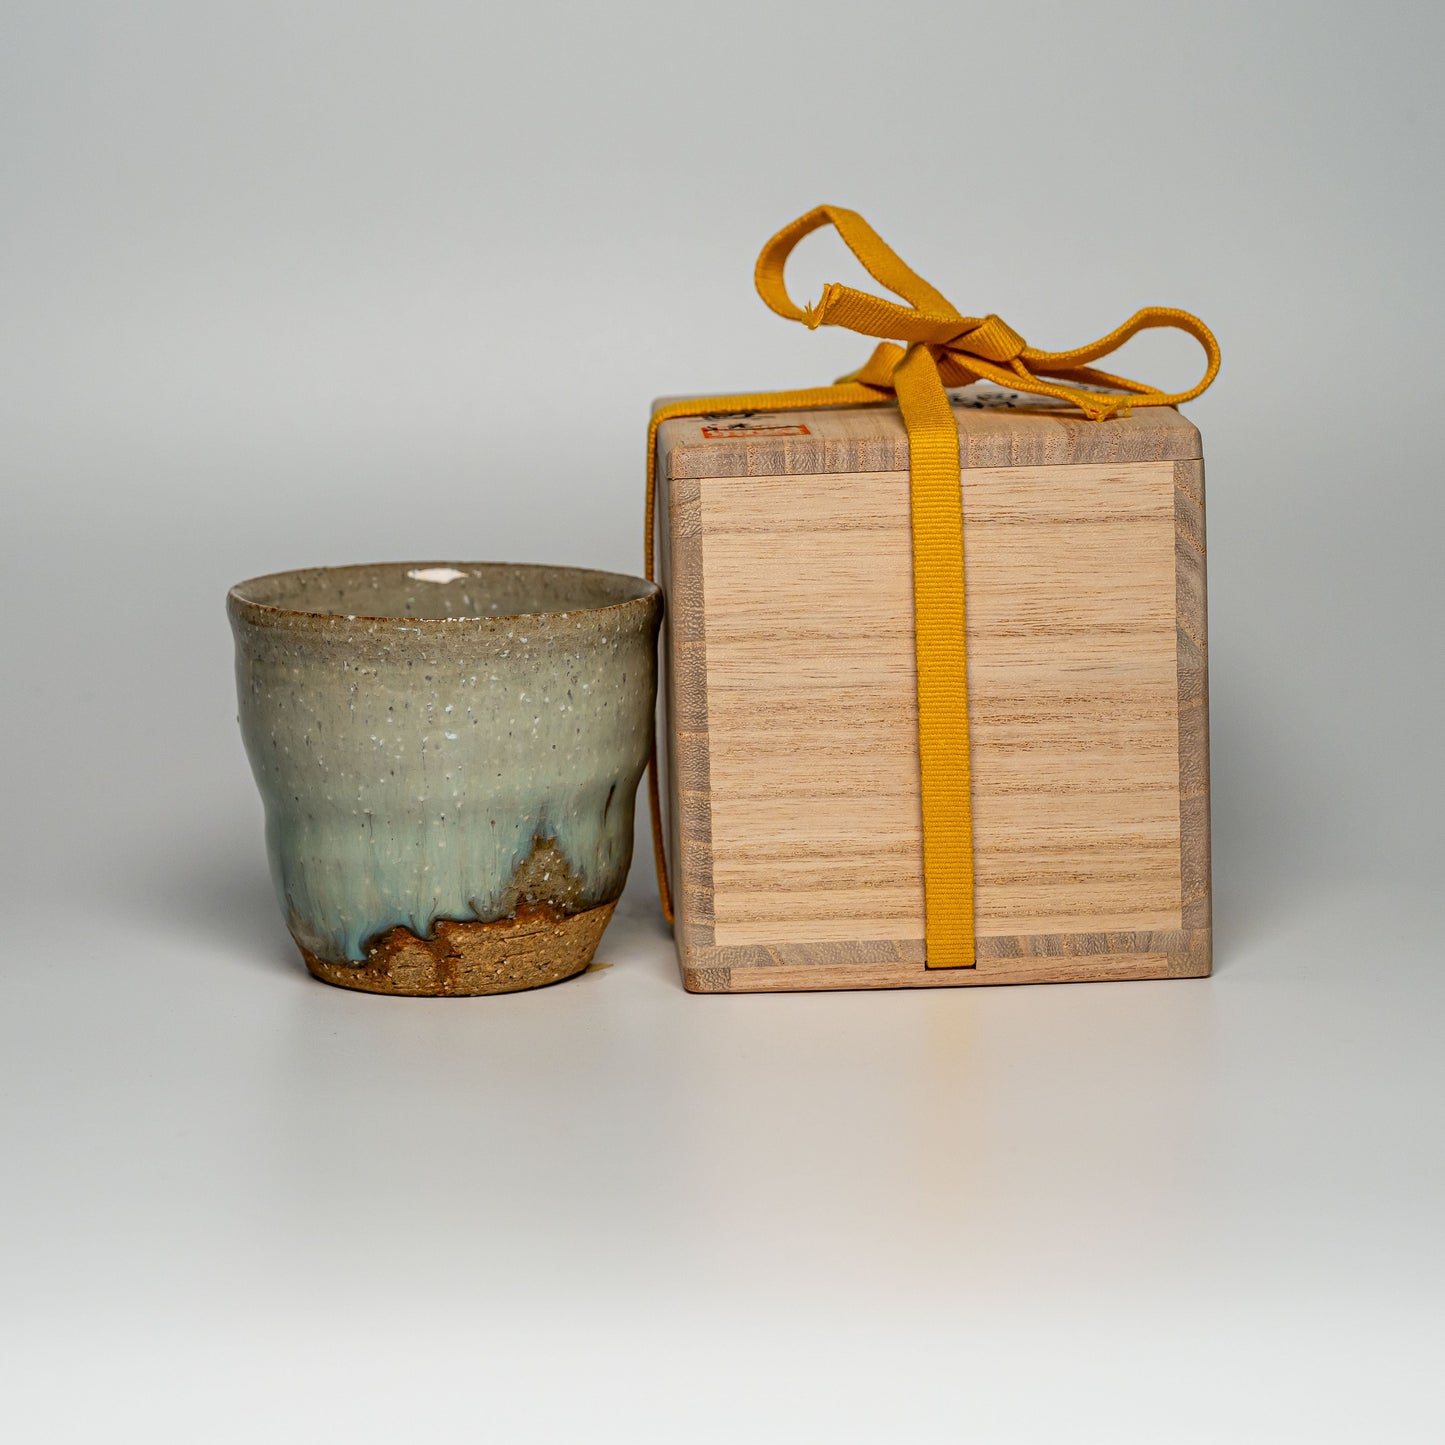 A green Hagi yaki shochu cup next to its wooden box on a white background